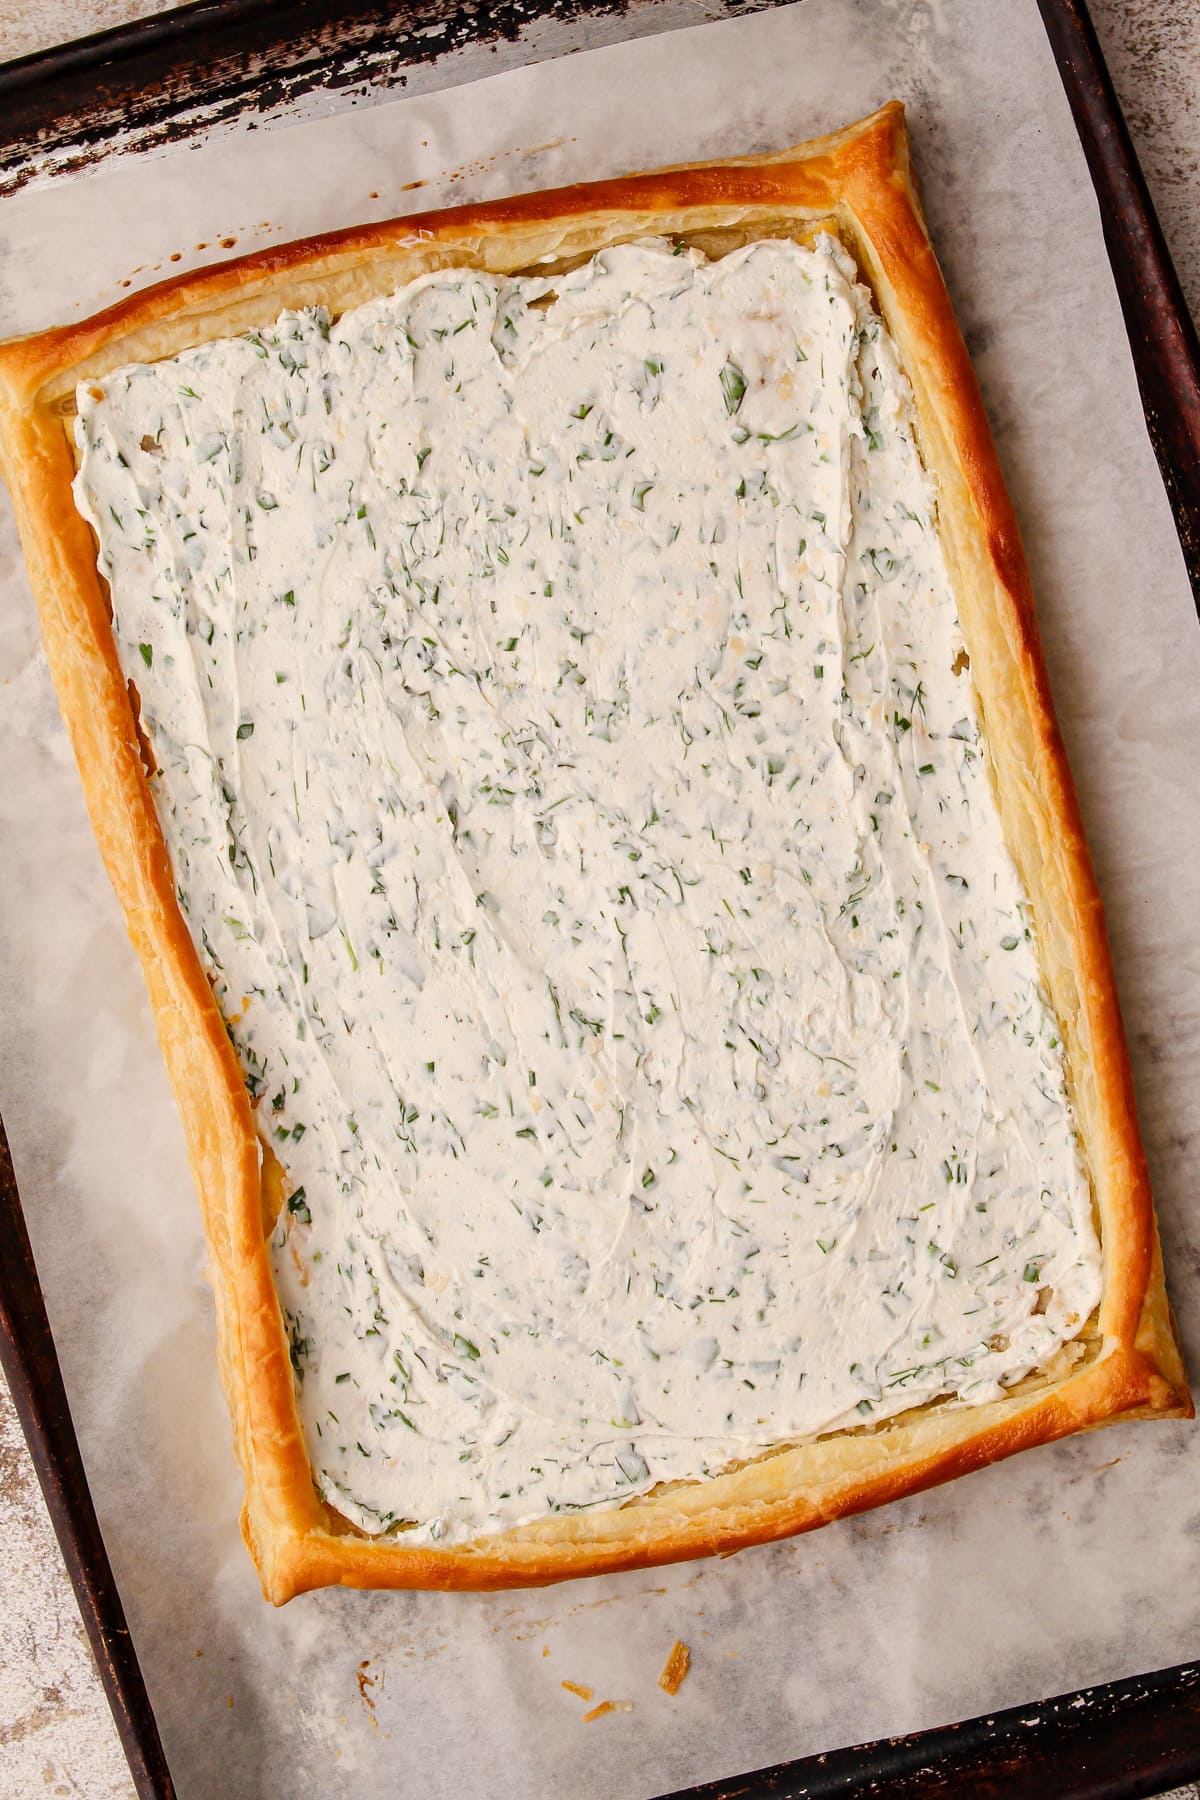 The goat cheese spread on the baked puff pastry shell.